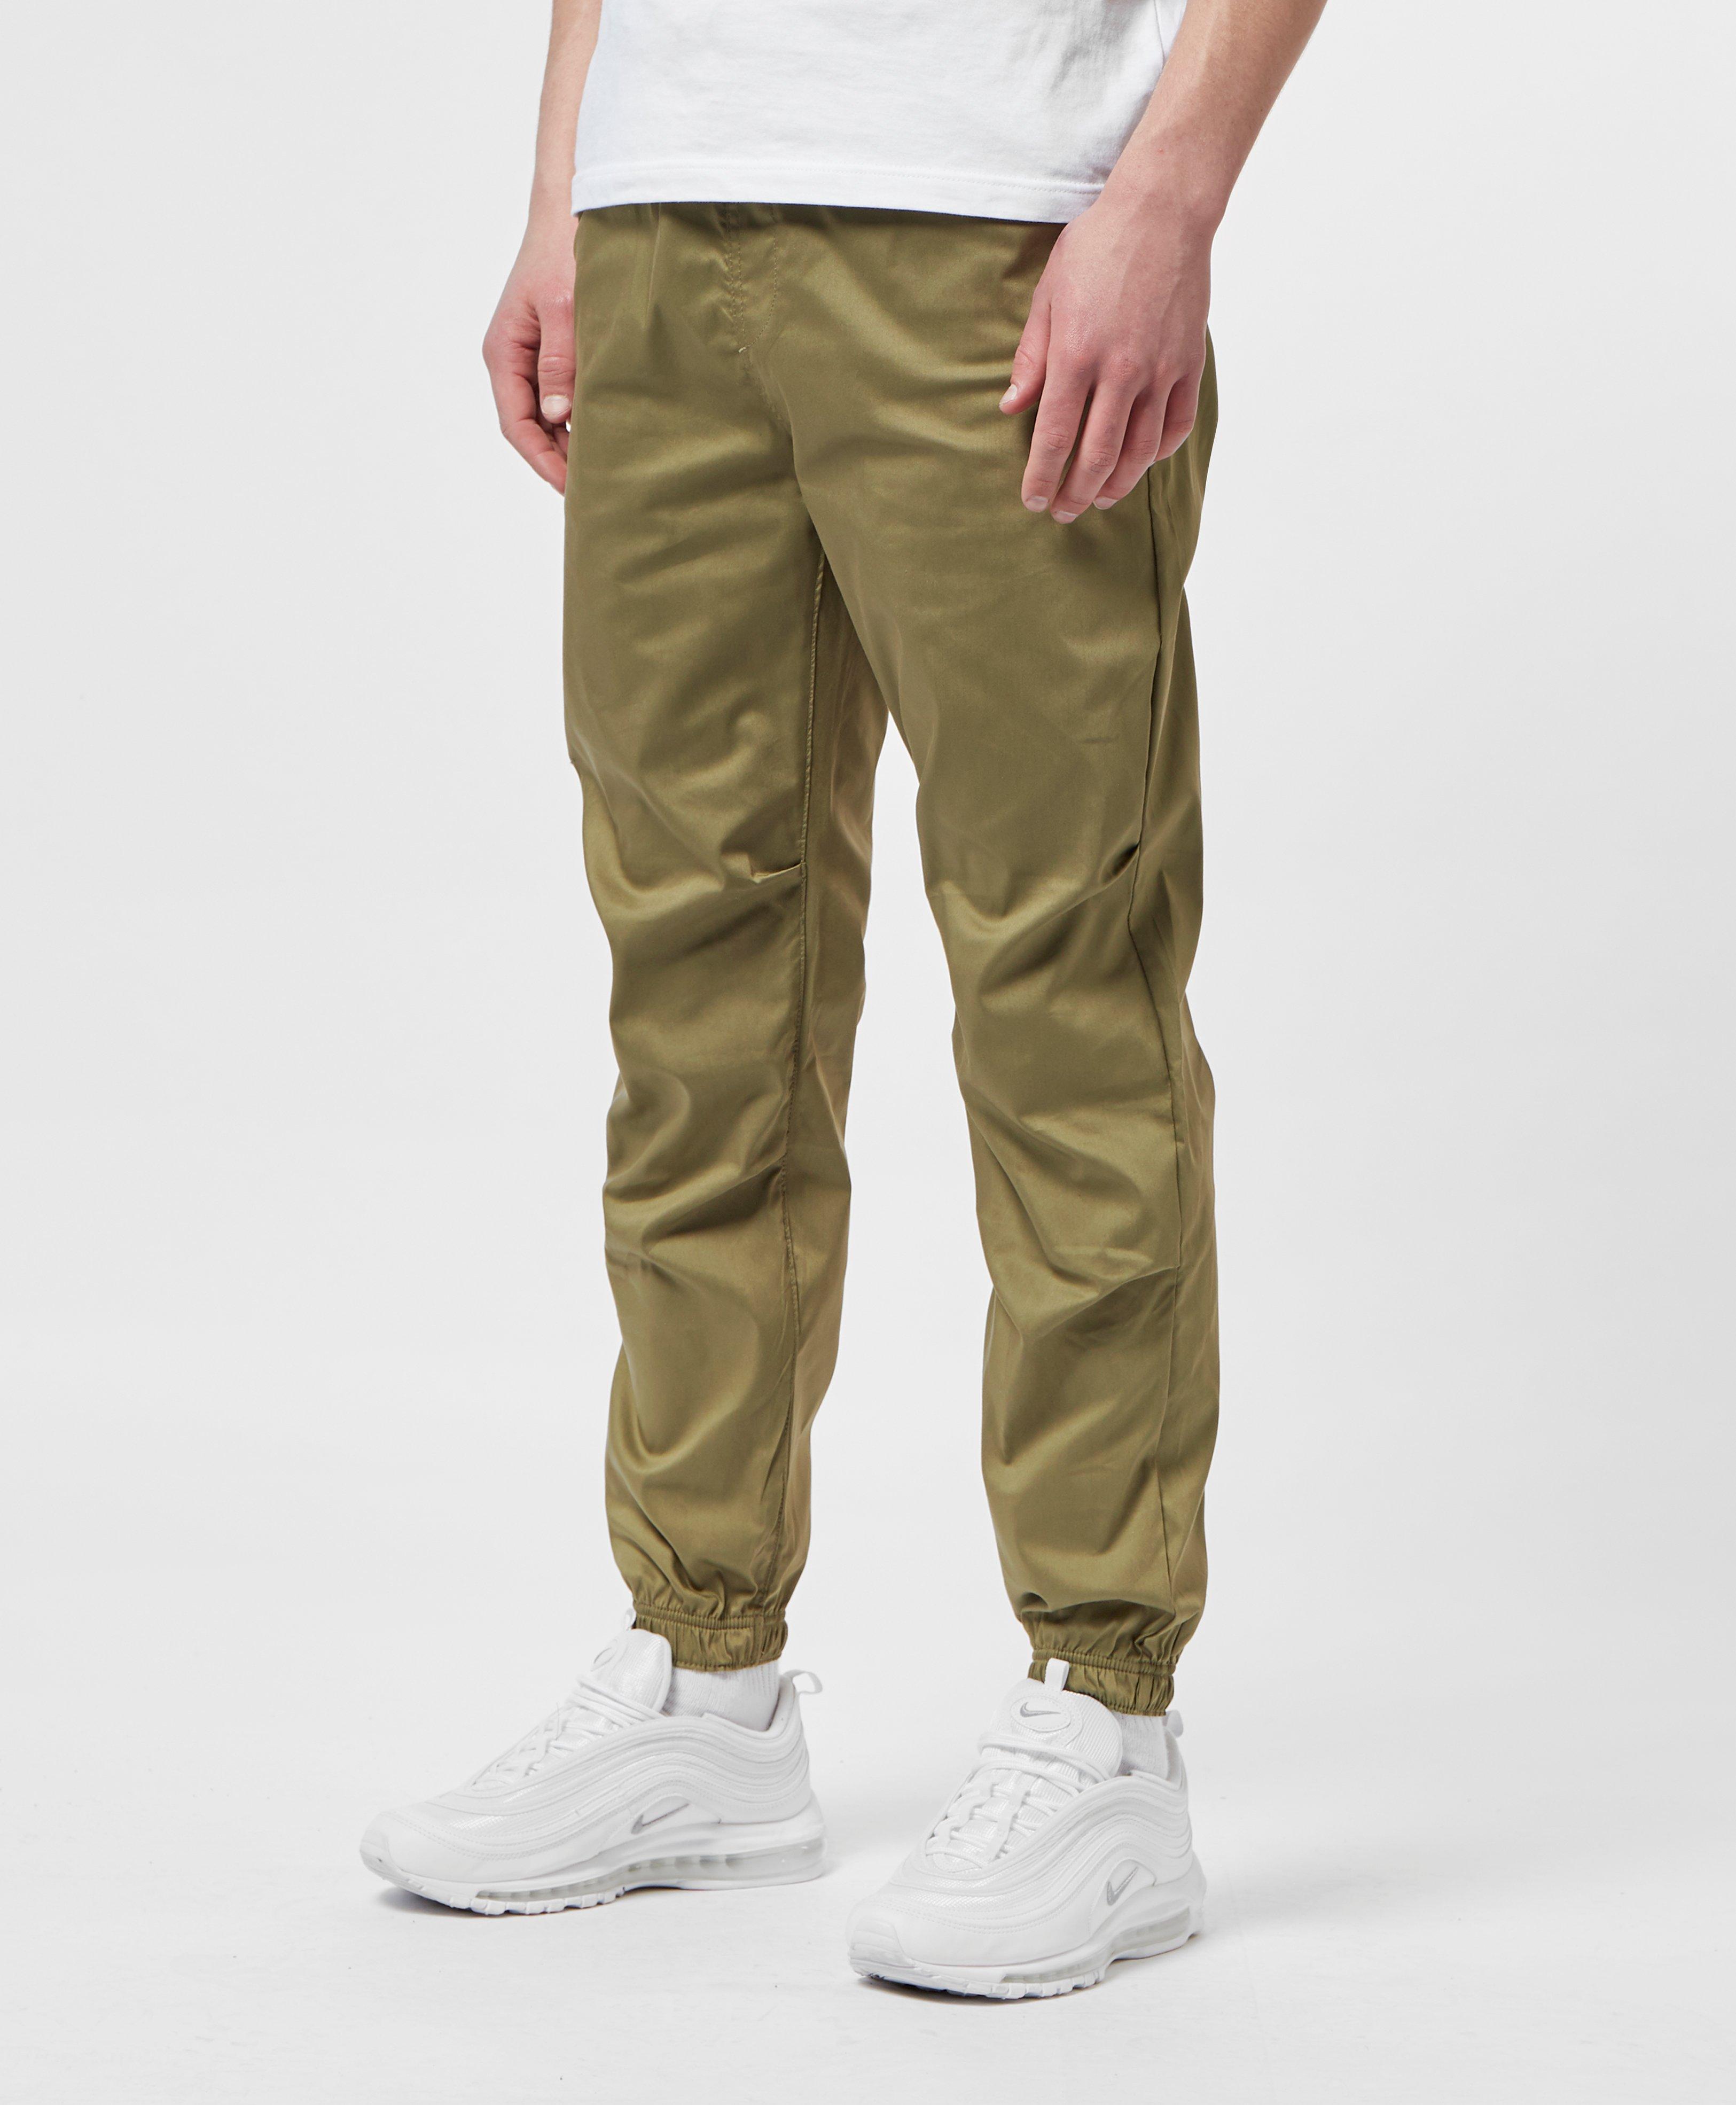 Timberland Ankle Cuff Cargo Pants - Online Exclusive in Green for Men ...